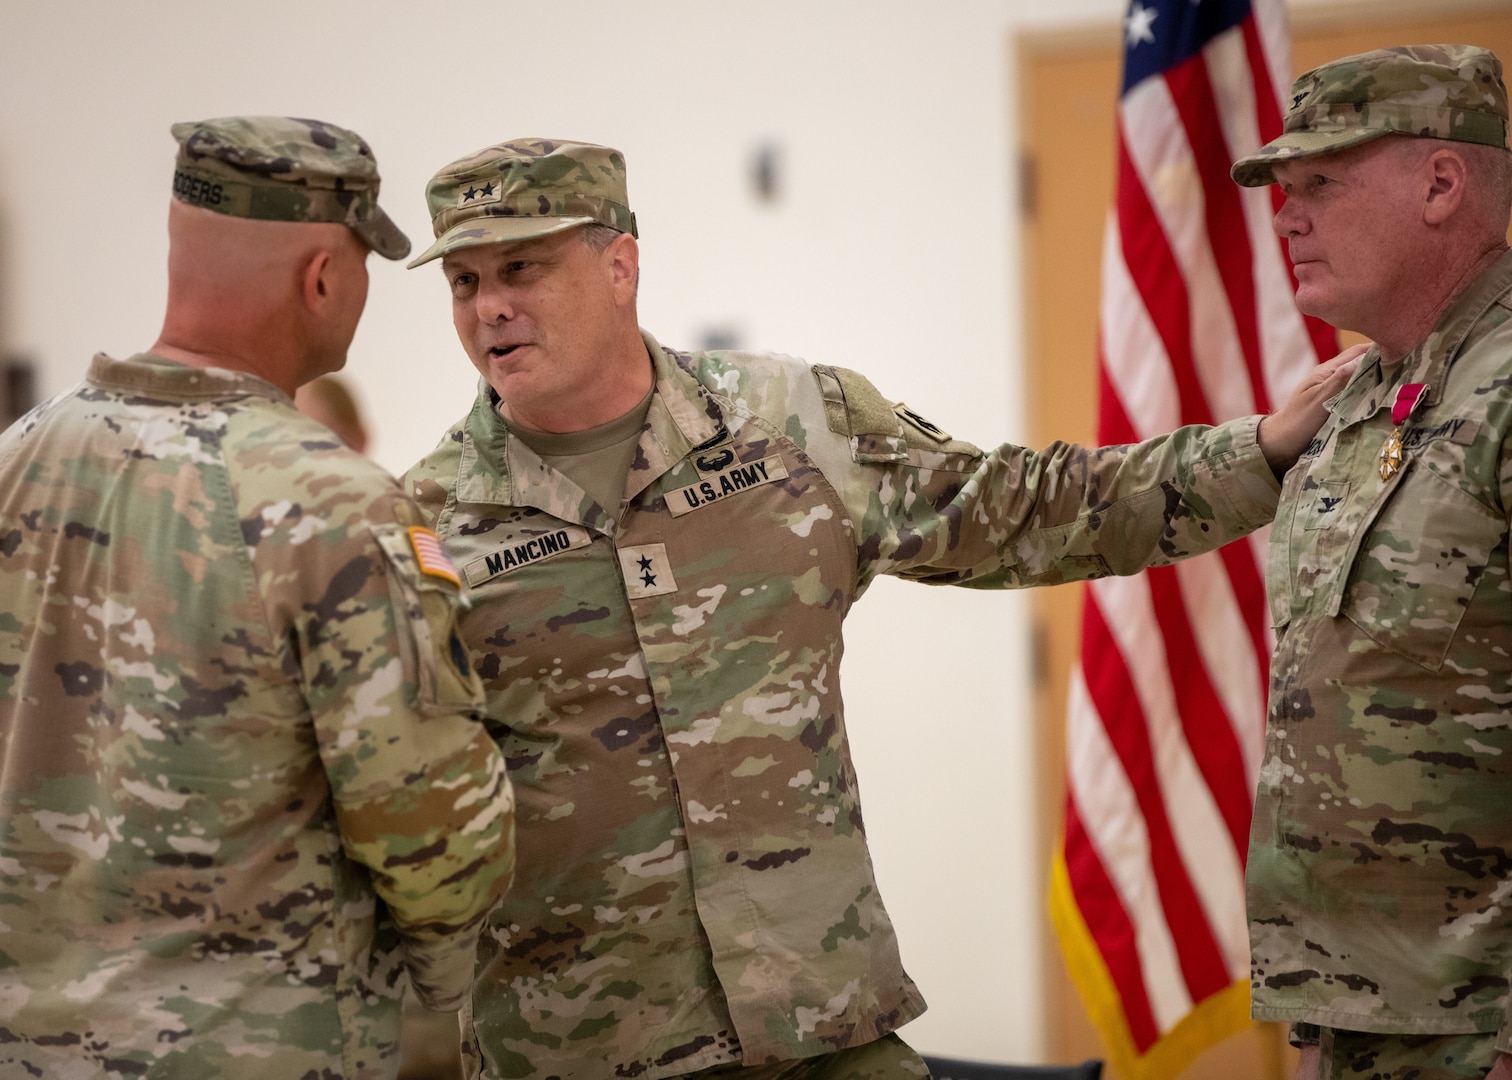 Maj. Gen. Thomas H. Mancino, adjutant general for Oklahoma, talks to Lt. Col. William Kale Rogers, incoming commander of the 45th Field Artillery Brigade, Oklahoma Army National Guard and Col. Johnnie Dale Moss, outgoing commander of the 45th FAB. The changing of command signifies the transfer of responsibility from outgoing to incoming commander.  (Oklahoma National Guard photo by Pfc. Brooklyn Clark)